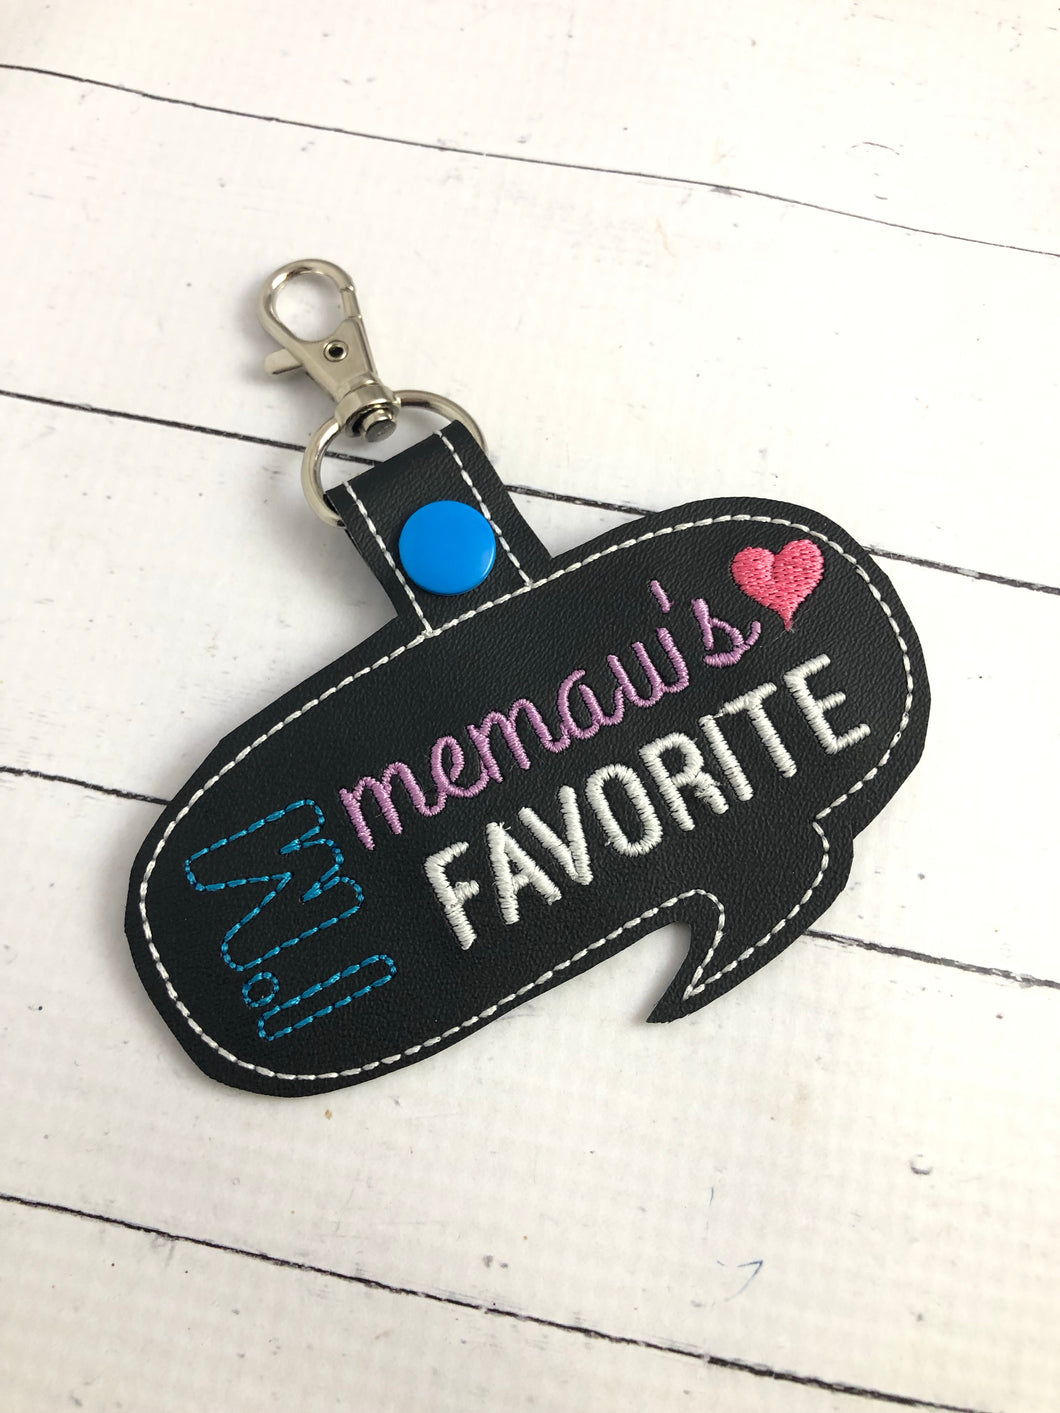 Memaw’s  Favorite snap tab embroidery design